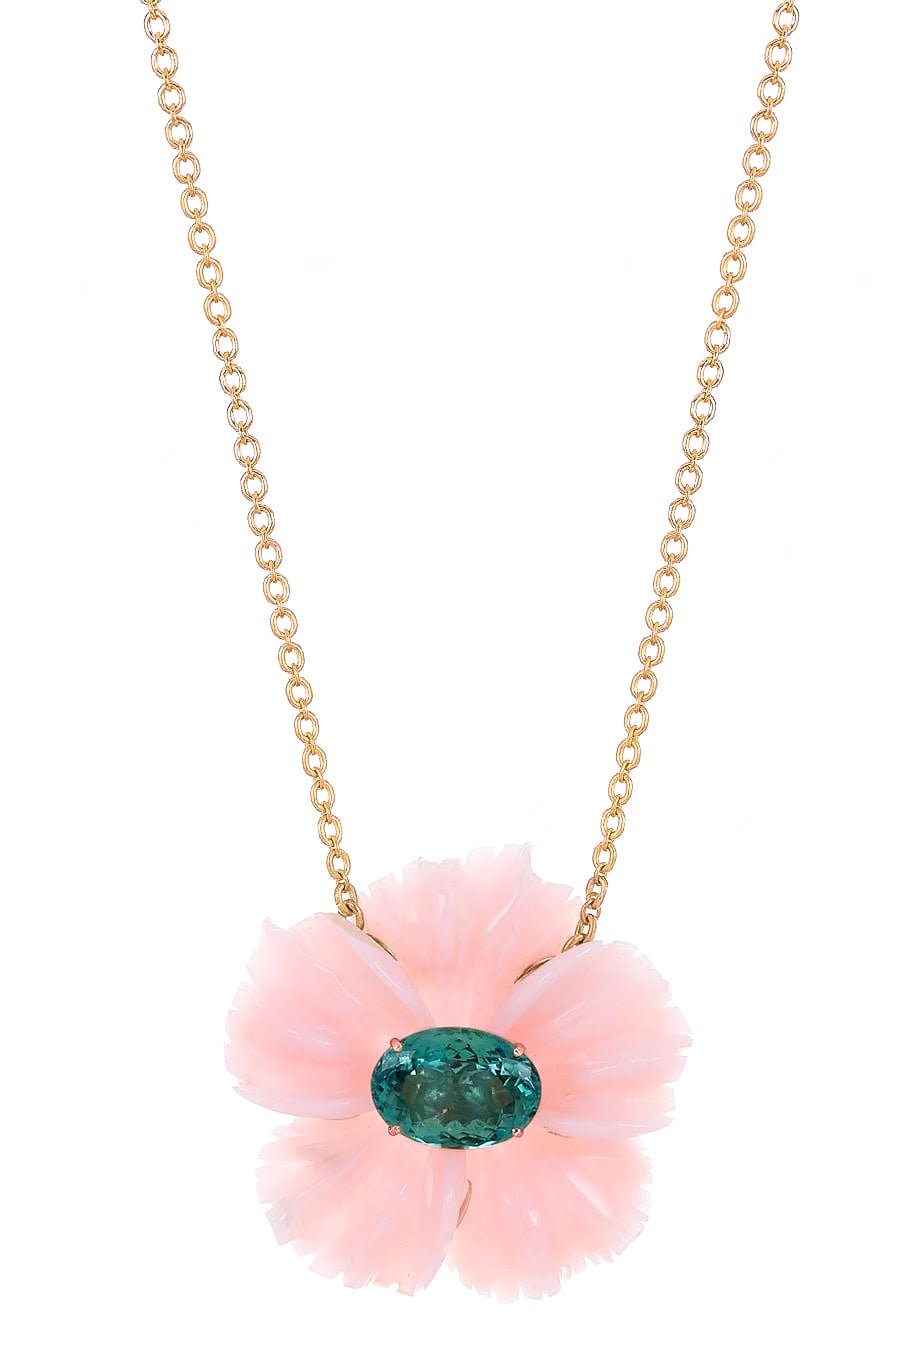 IRENE NEUWIRTH JEWELRY-Pink Opal and Green Tourmaline Tropical Flower Necklace-ROSE GOLD